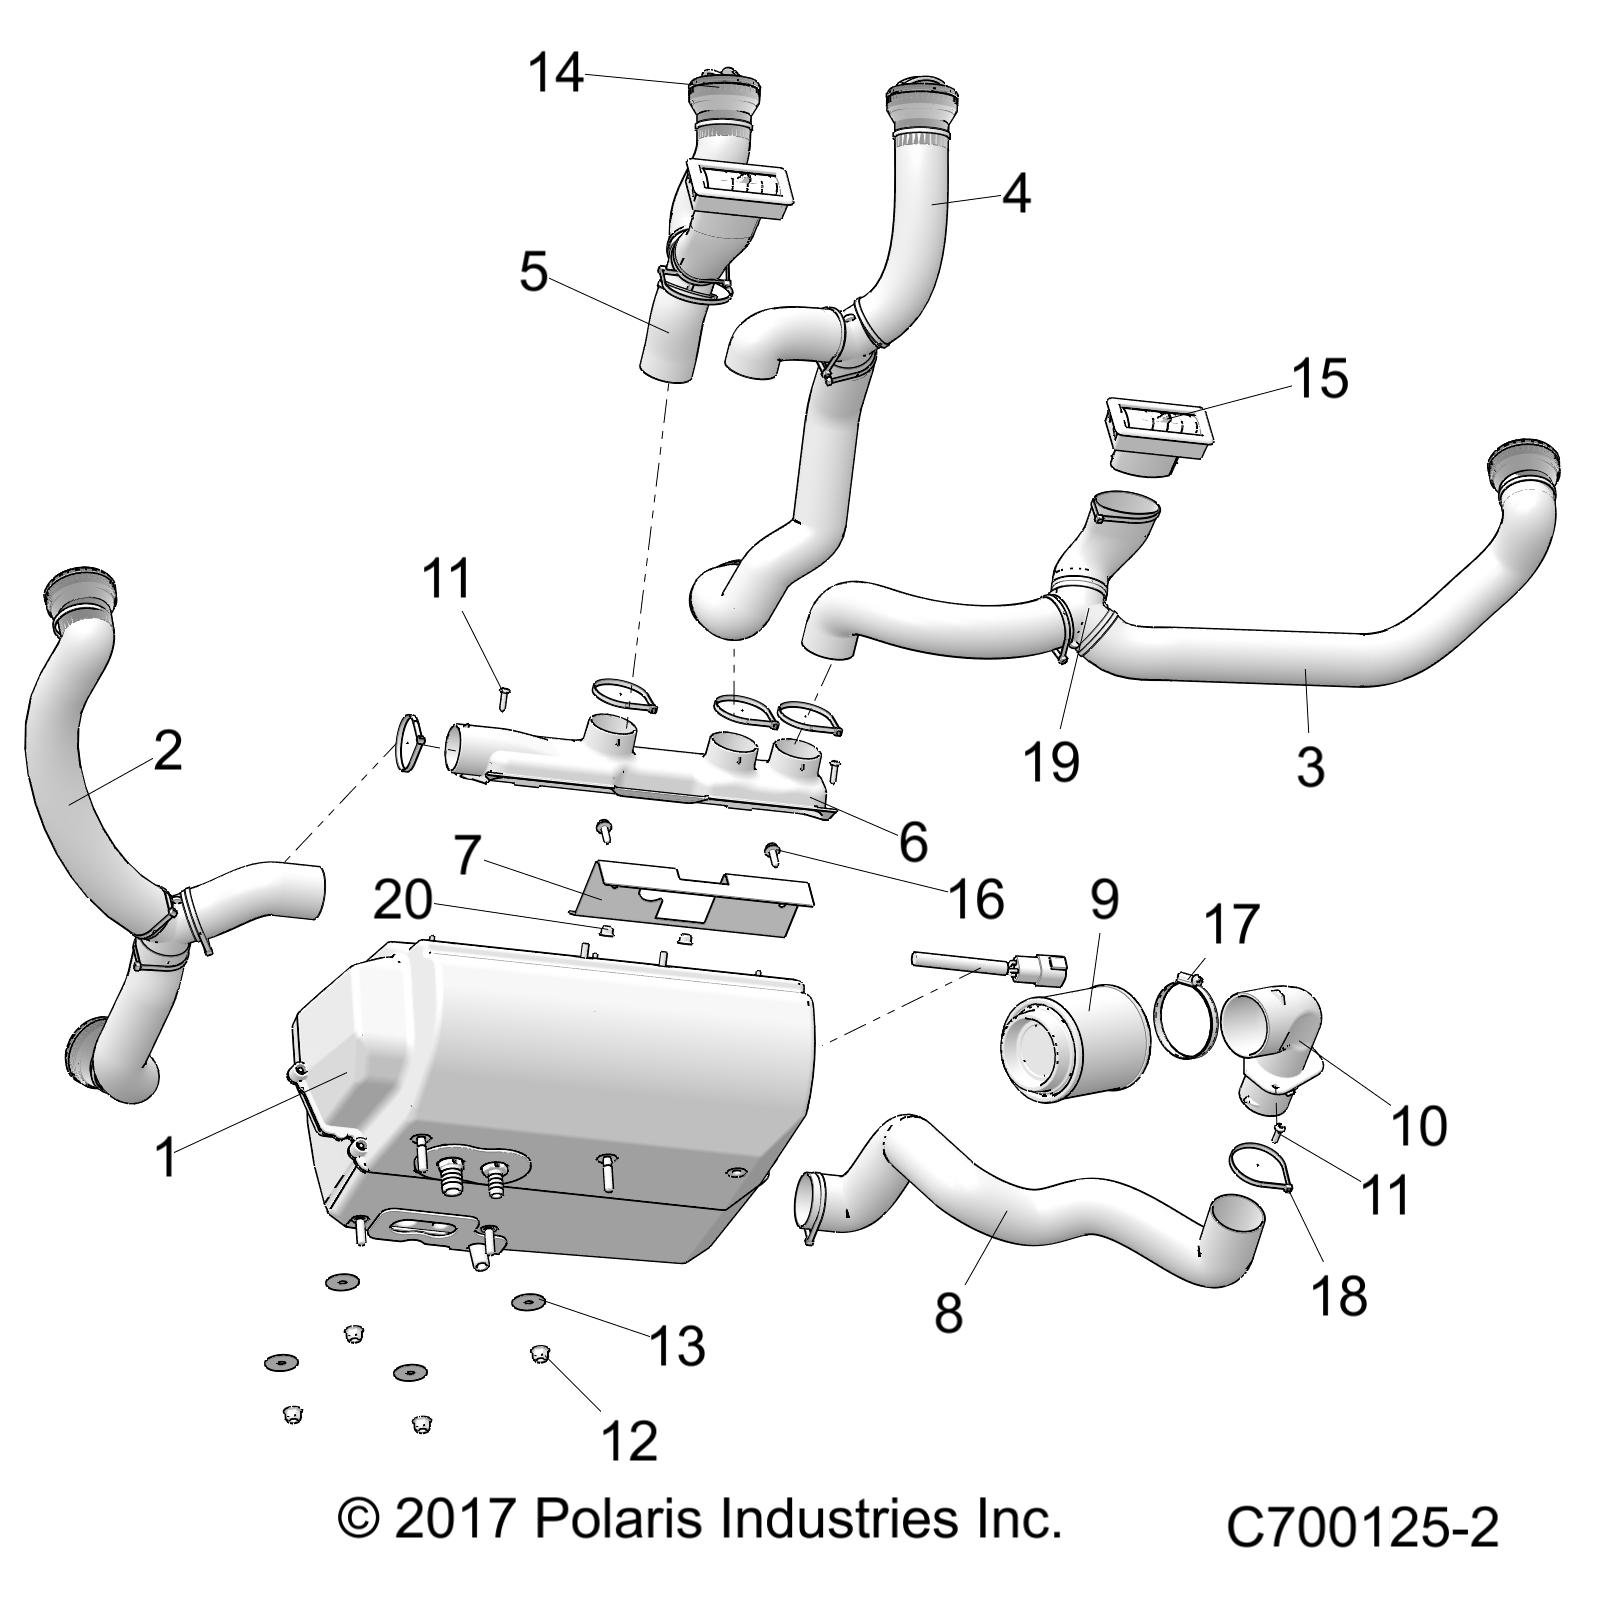 Part Number : 2636687 CENTER DASH DUCTING ASSEMBLY